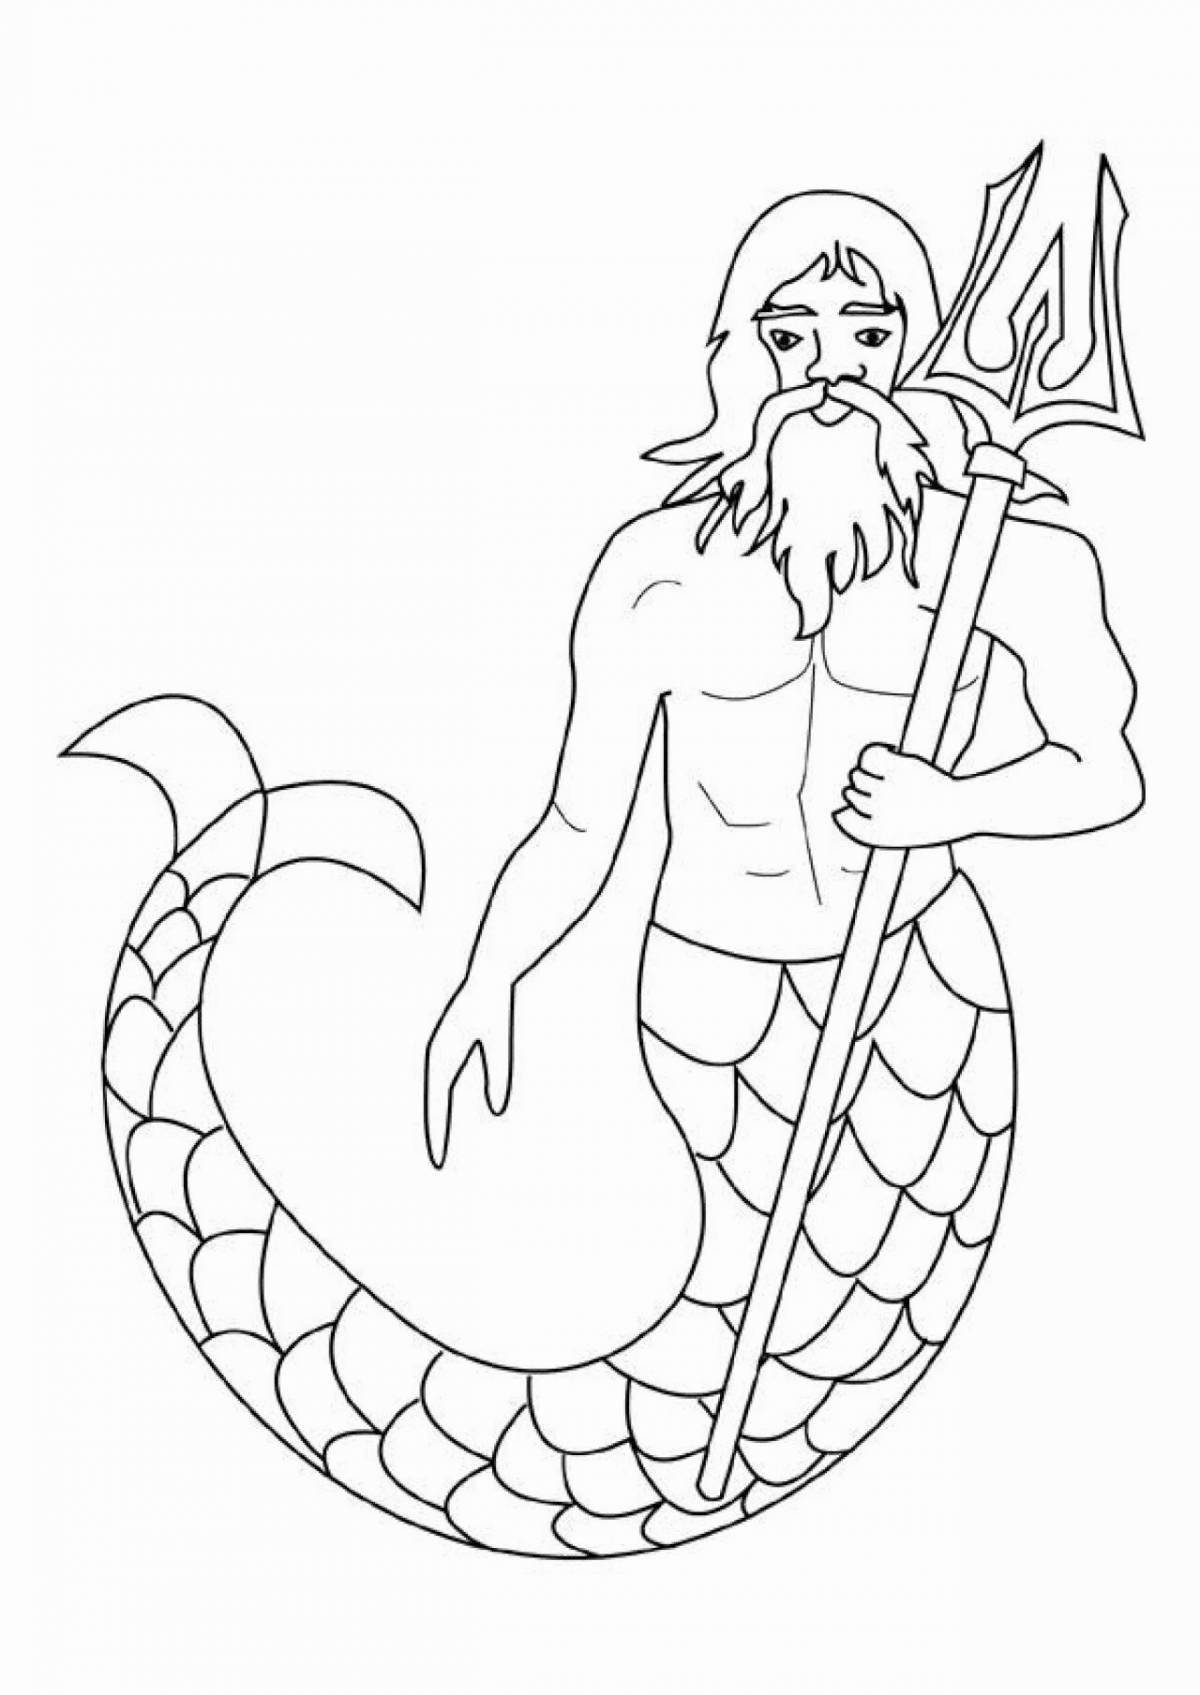 Great myth coloring book